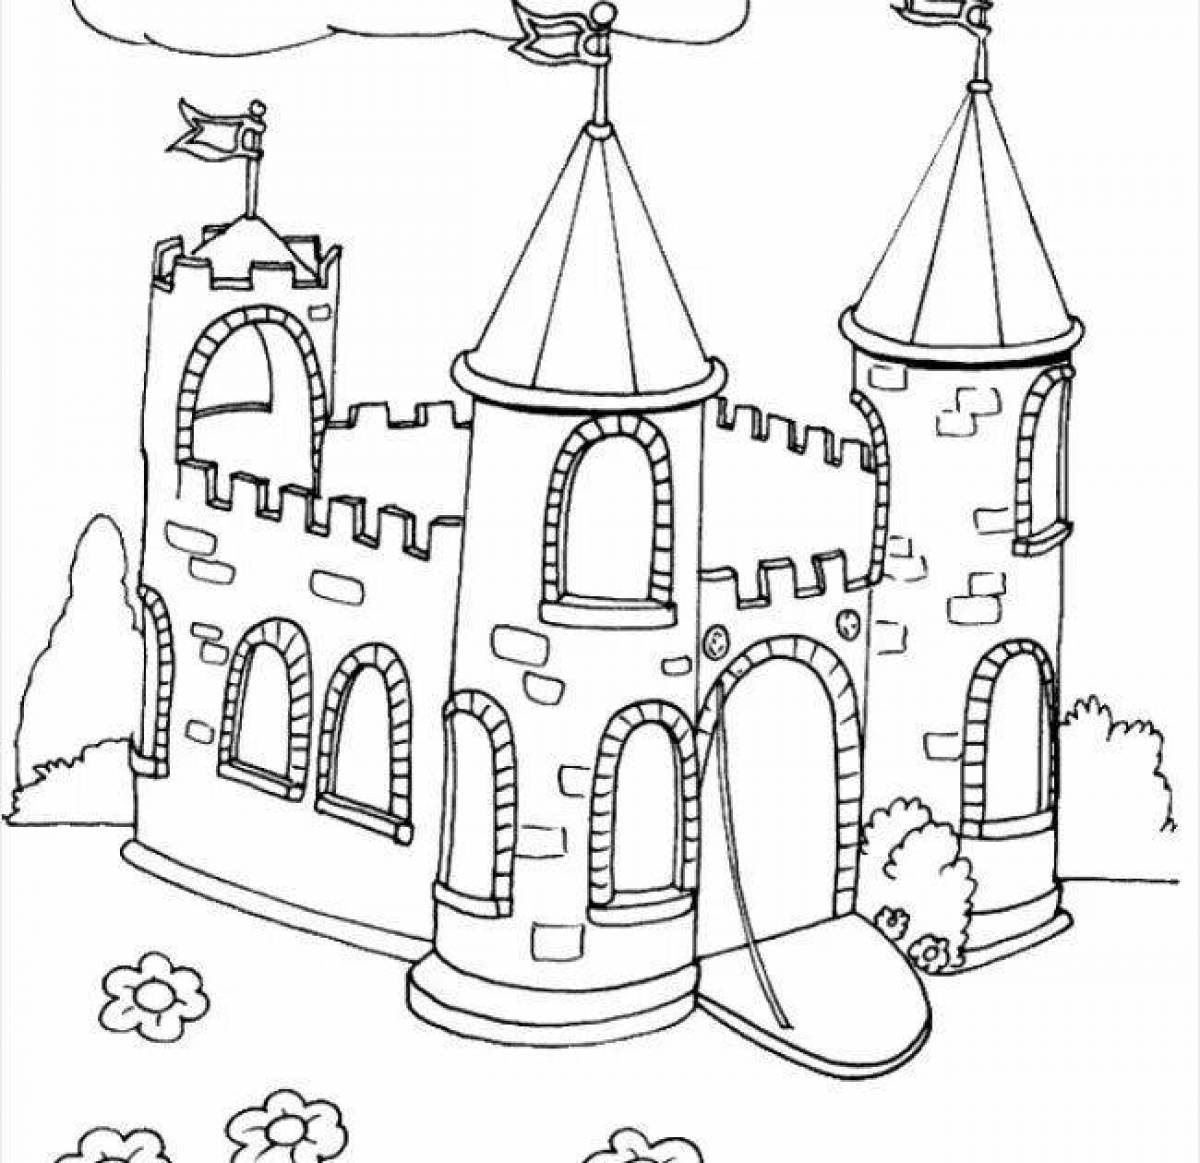 Dazzling Fortress coloring book for kids